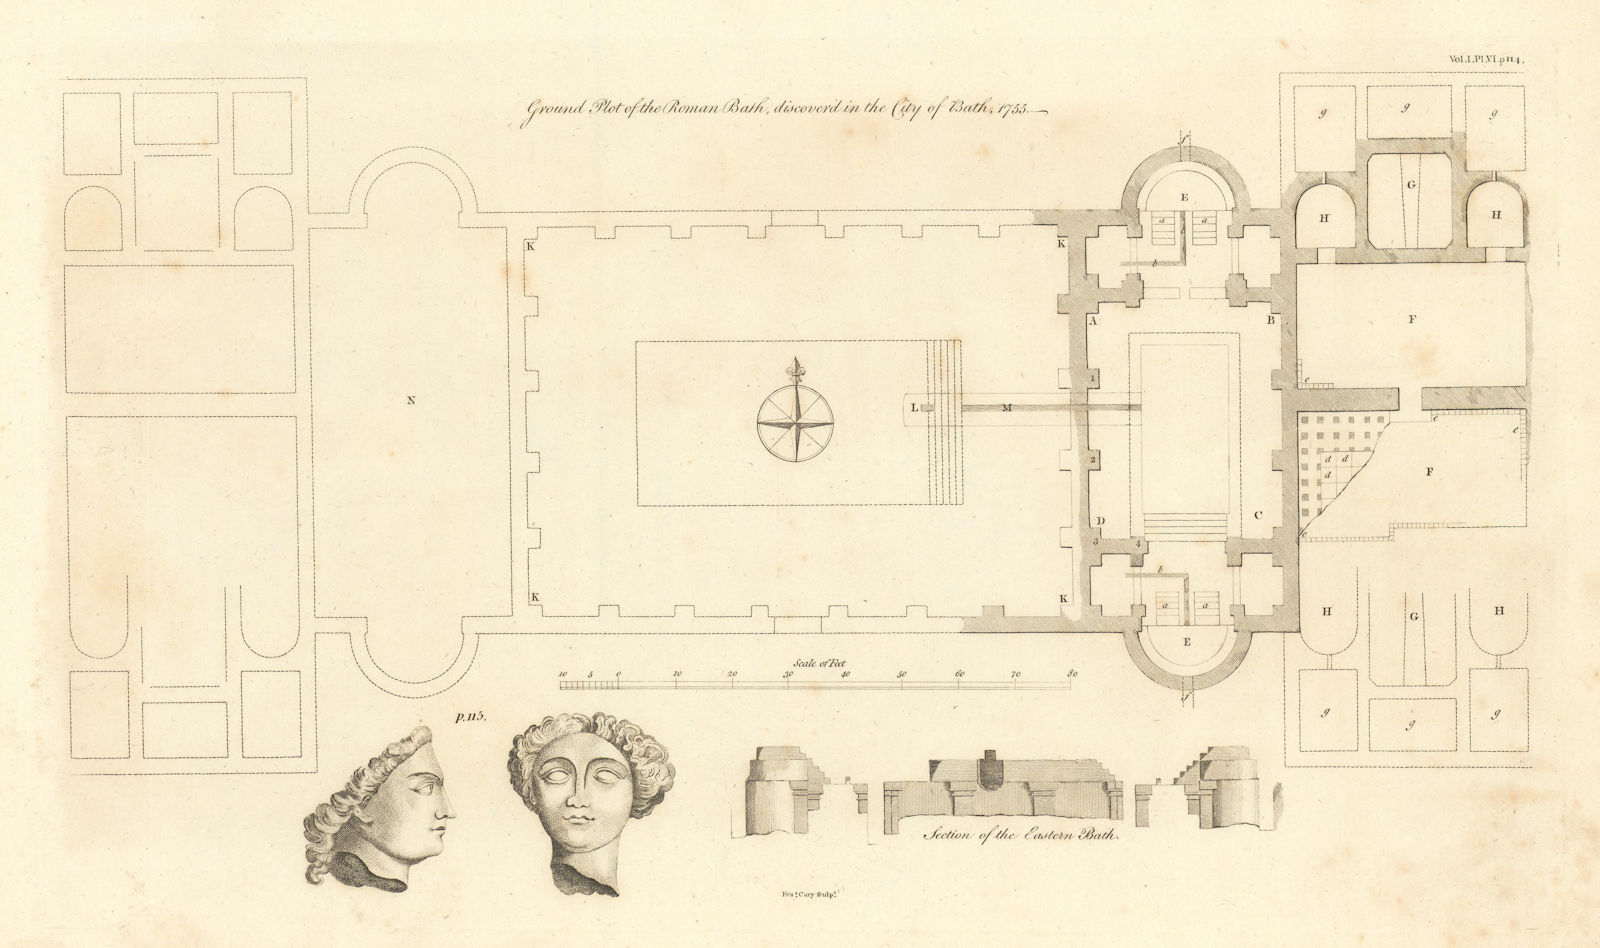 Ground plot of the Roman Bath discover'd in the City of Bath 1755. CARY 1806 map